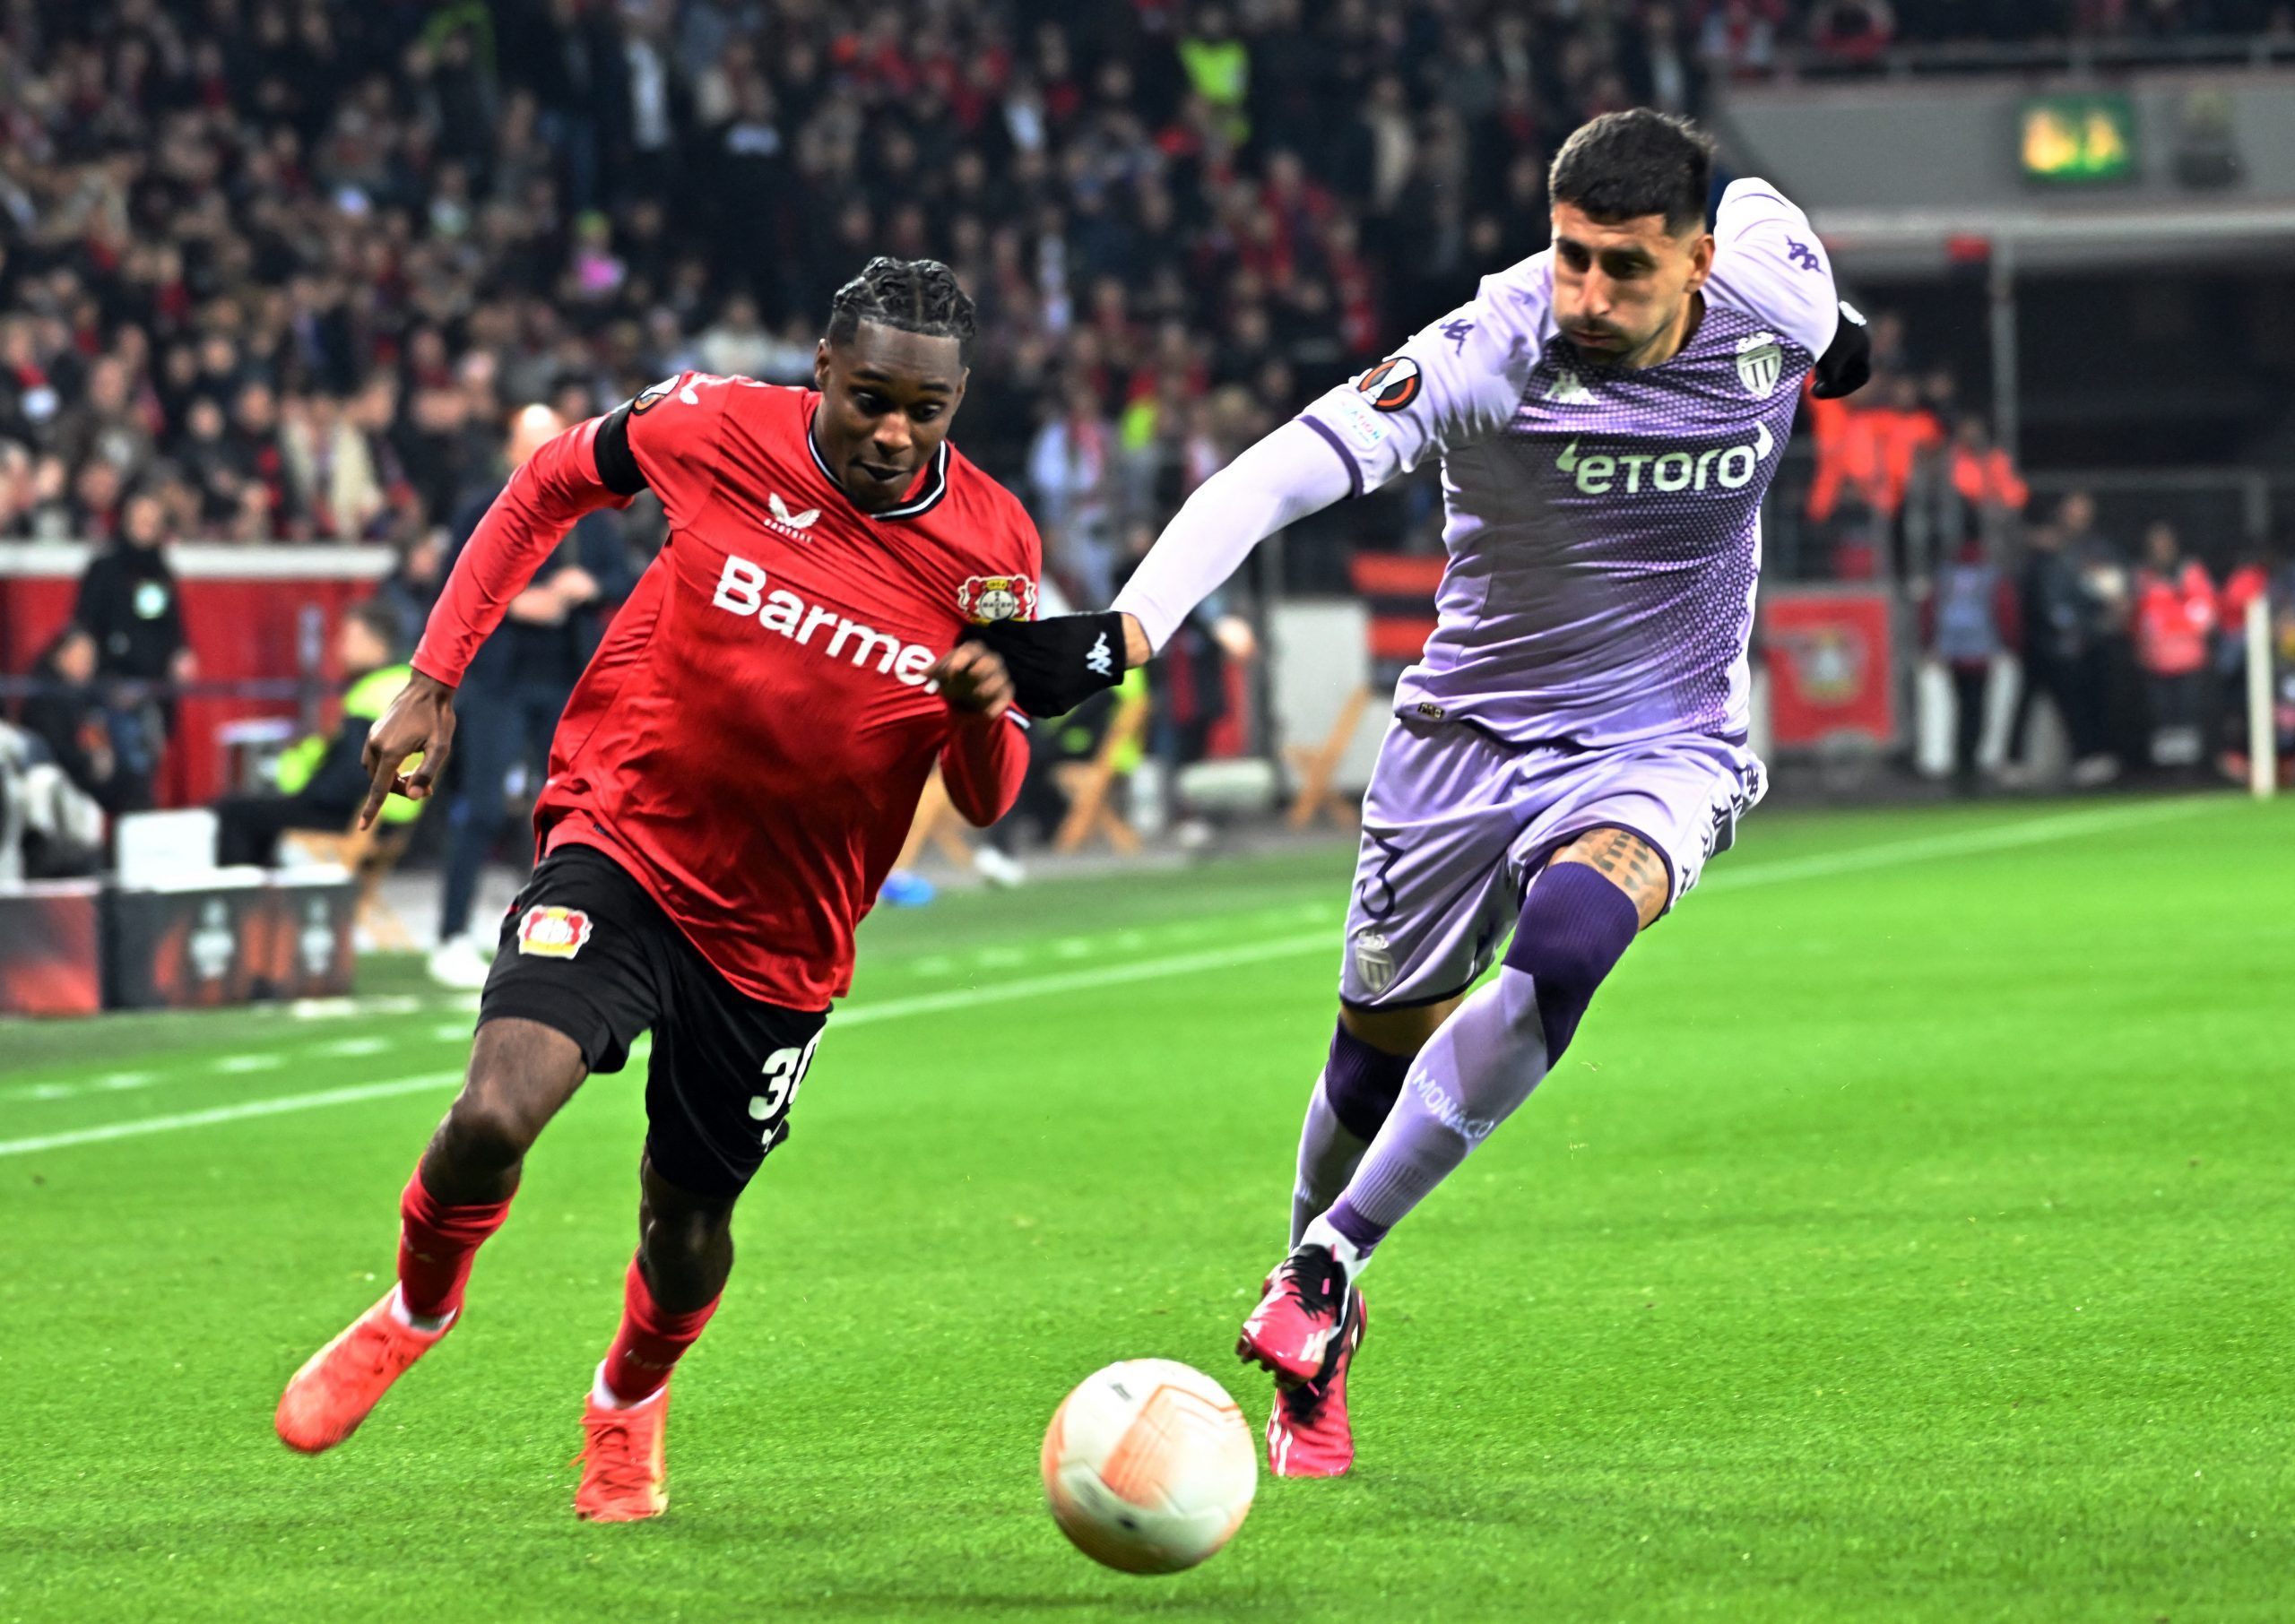 Soccer Football - Europa Conference League - Play-Off First Leg - Bayer Leverkusen v AS Monaco - BayArena, Leverkusen, Germany - February 16, 2023   Bayer Leverkusen's Jeremie Frimpong in action with AS Monaco's Guillermo Maripan REUTERS/Benjamin Westhoff